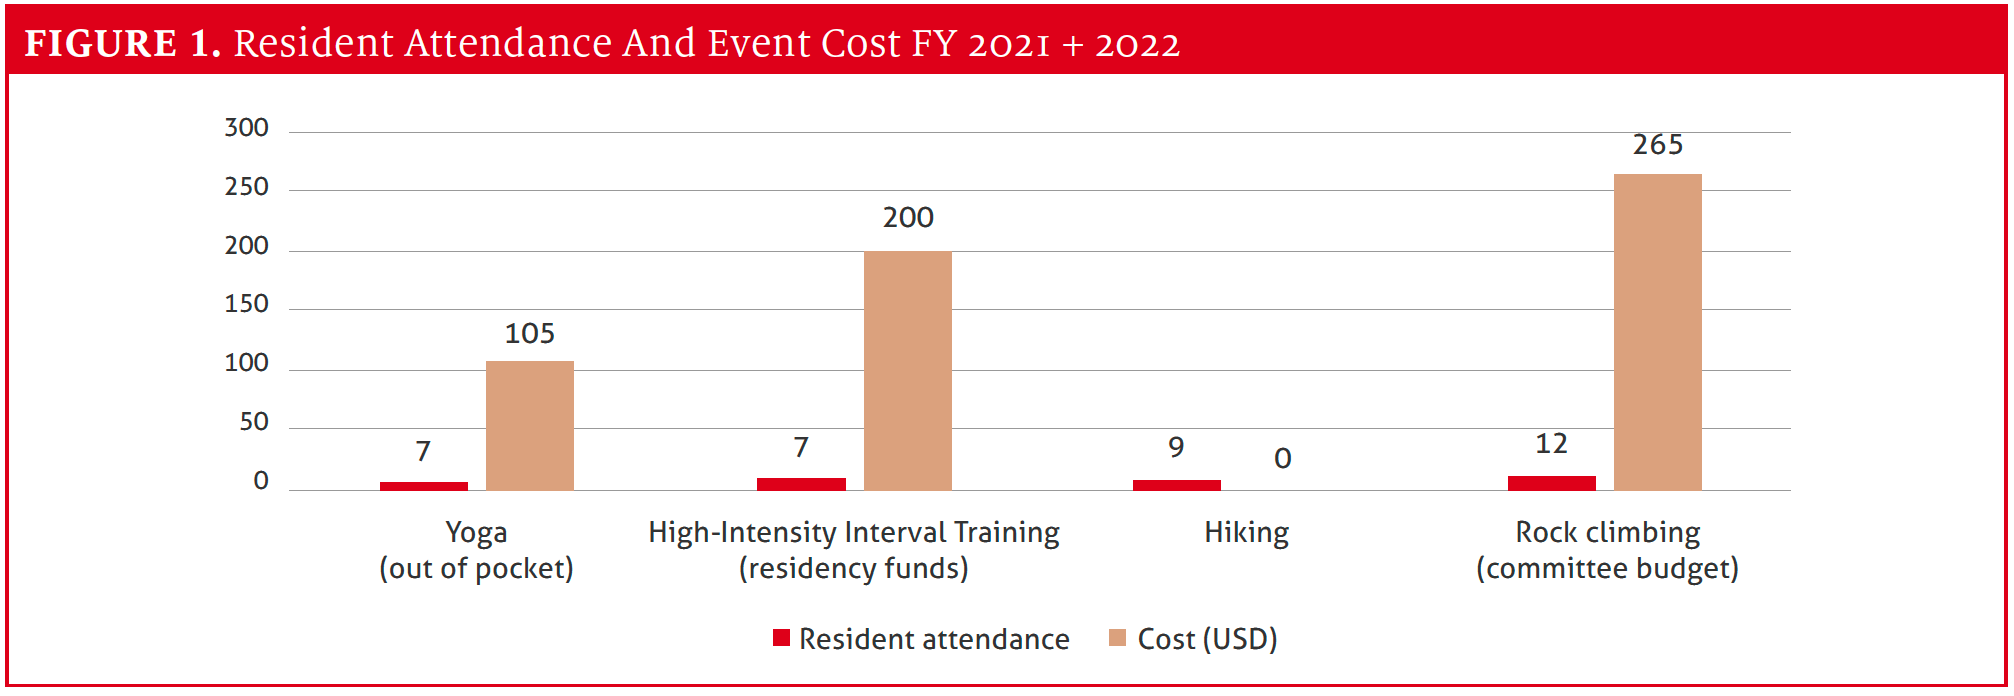 Figure 1: Resident Attendance and Event Cost FY 2021 and 2022